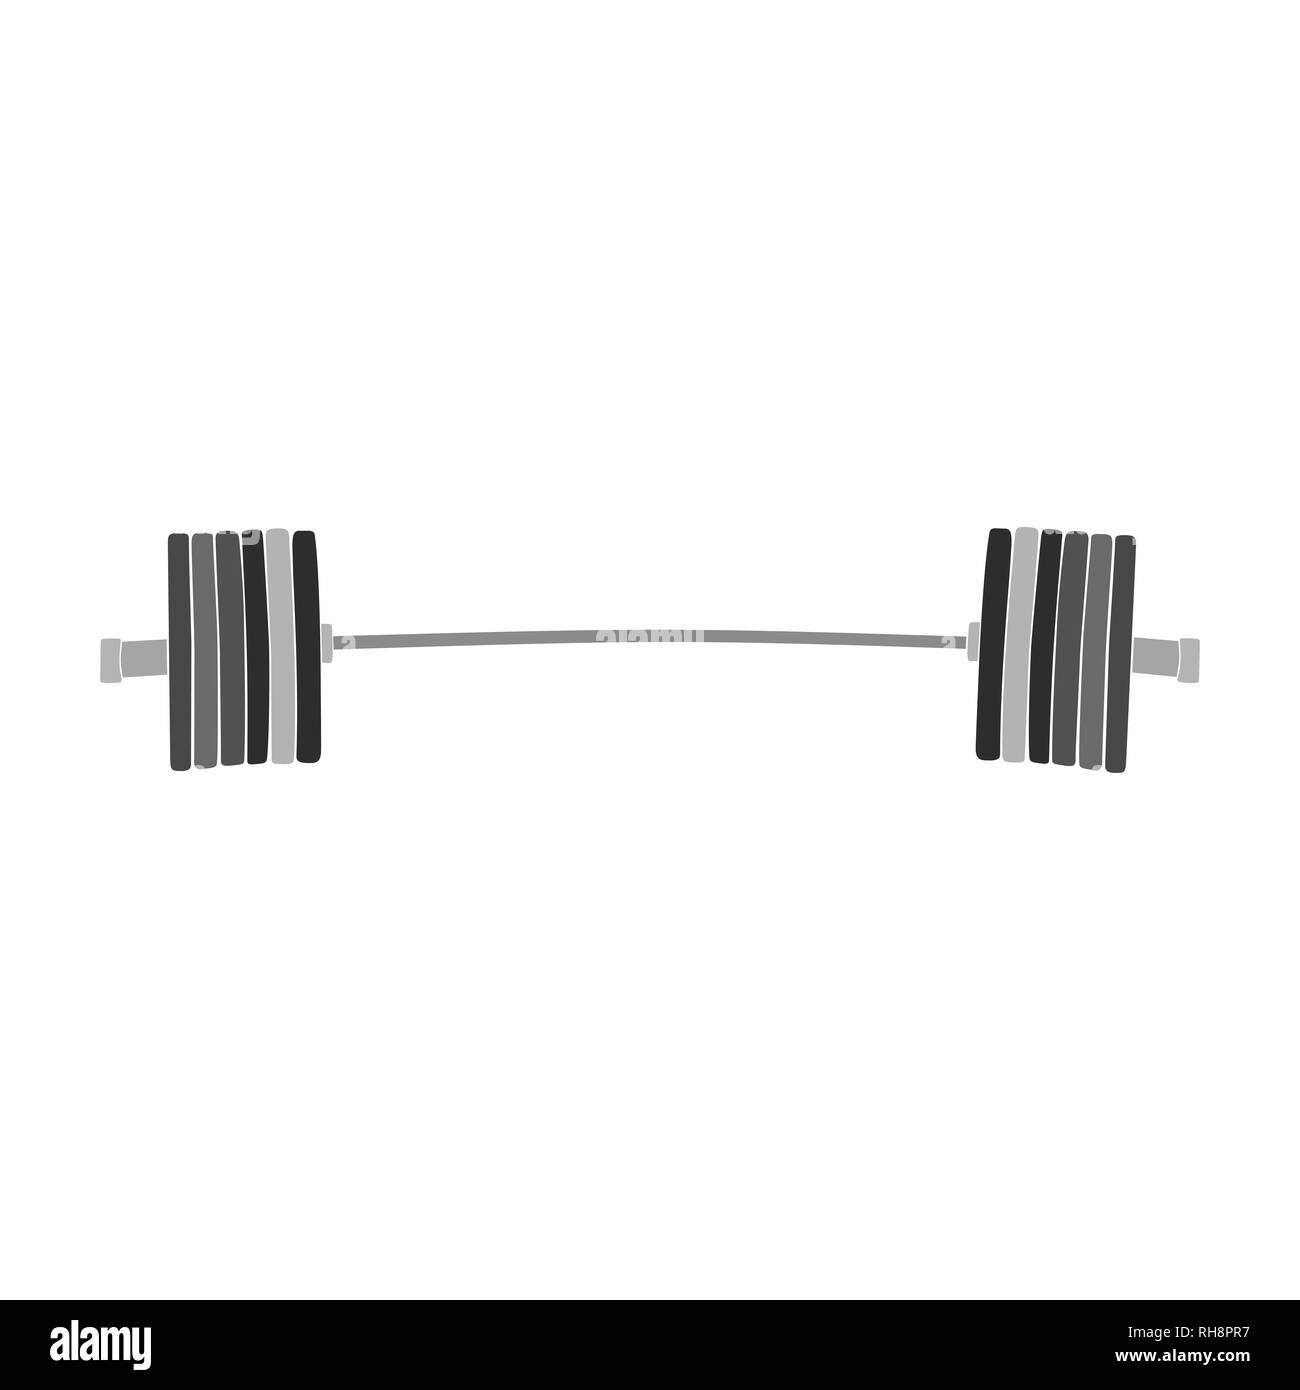 barbell powerlifting weight plates black and white silhouette Stock Photo